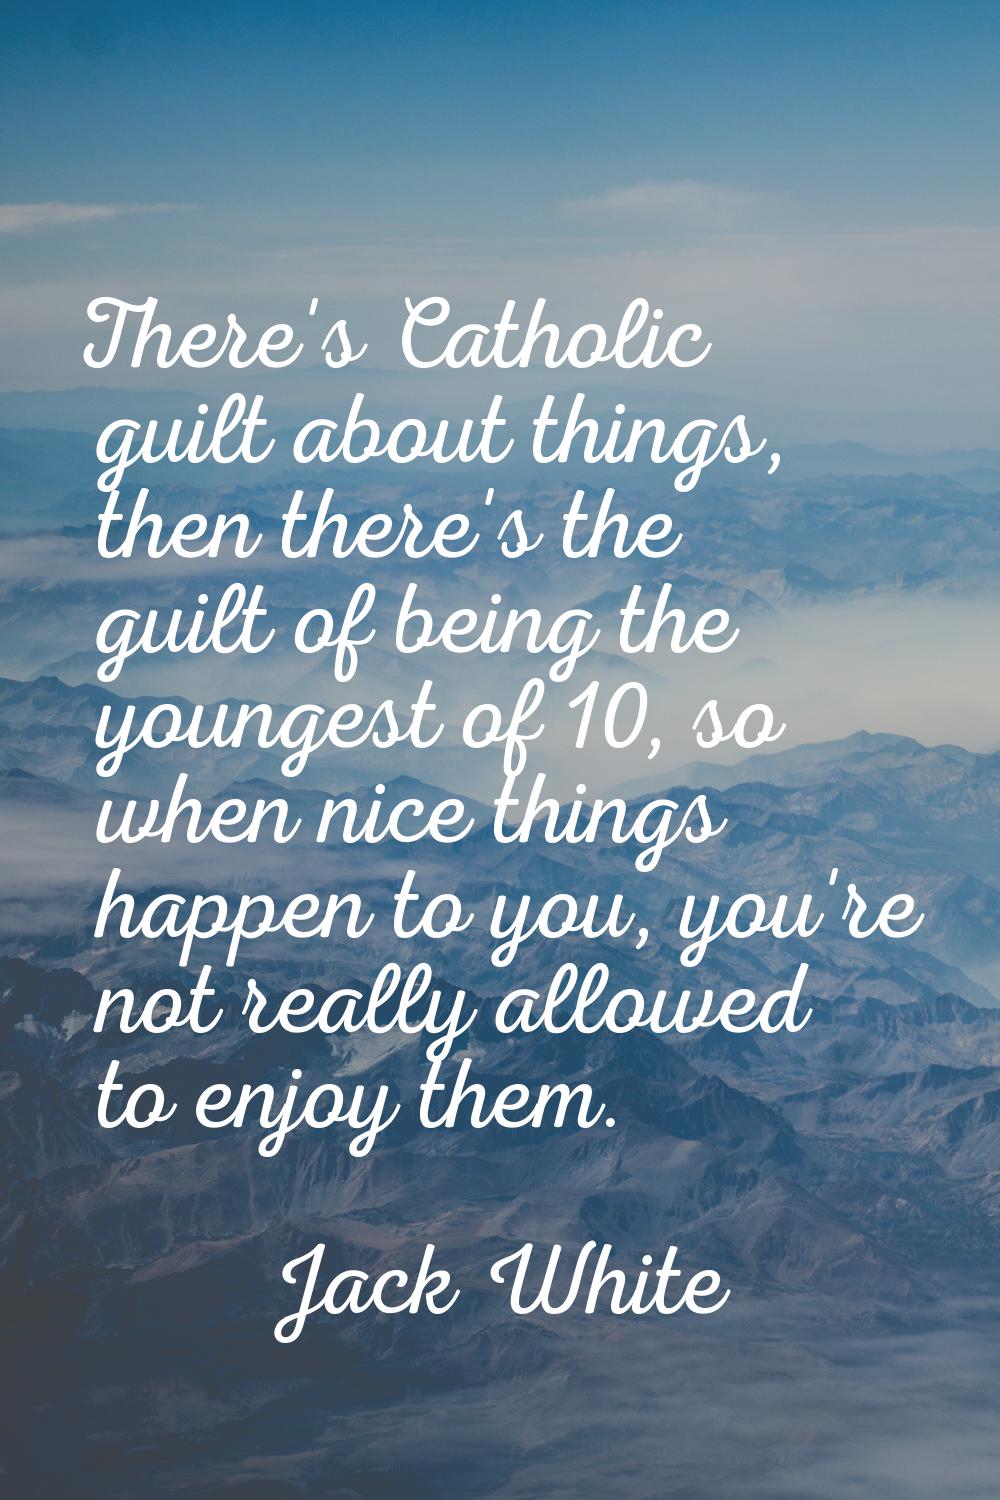 There's Catholic guilt about things, then there's the guilt of being the youngest of 10, so when ni